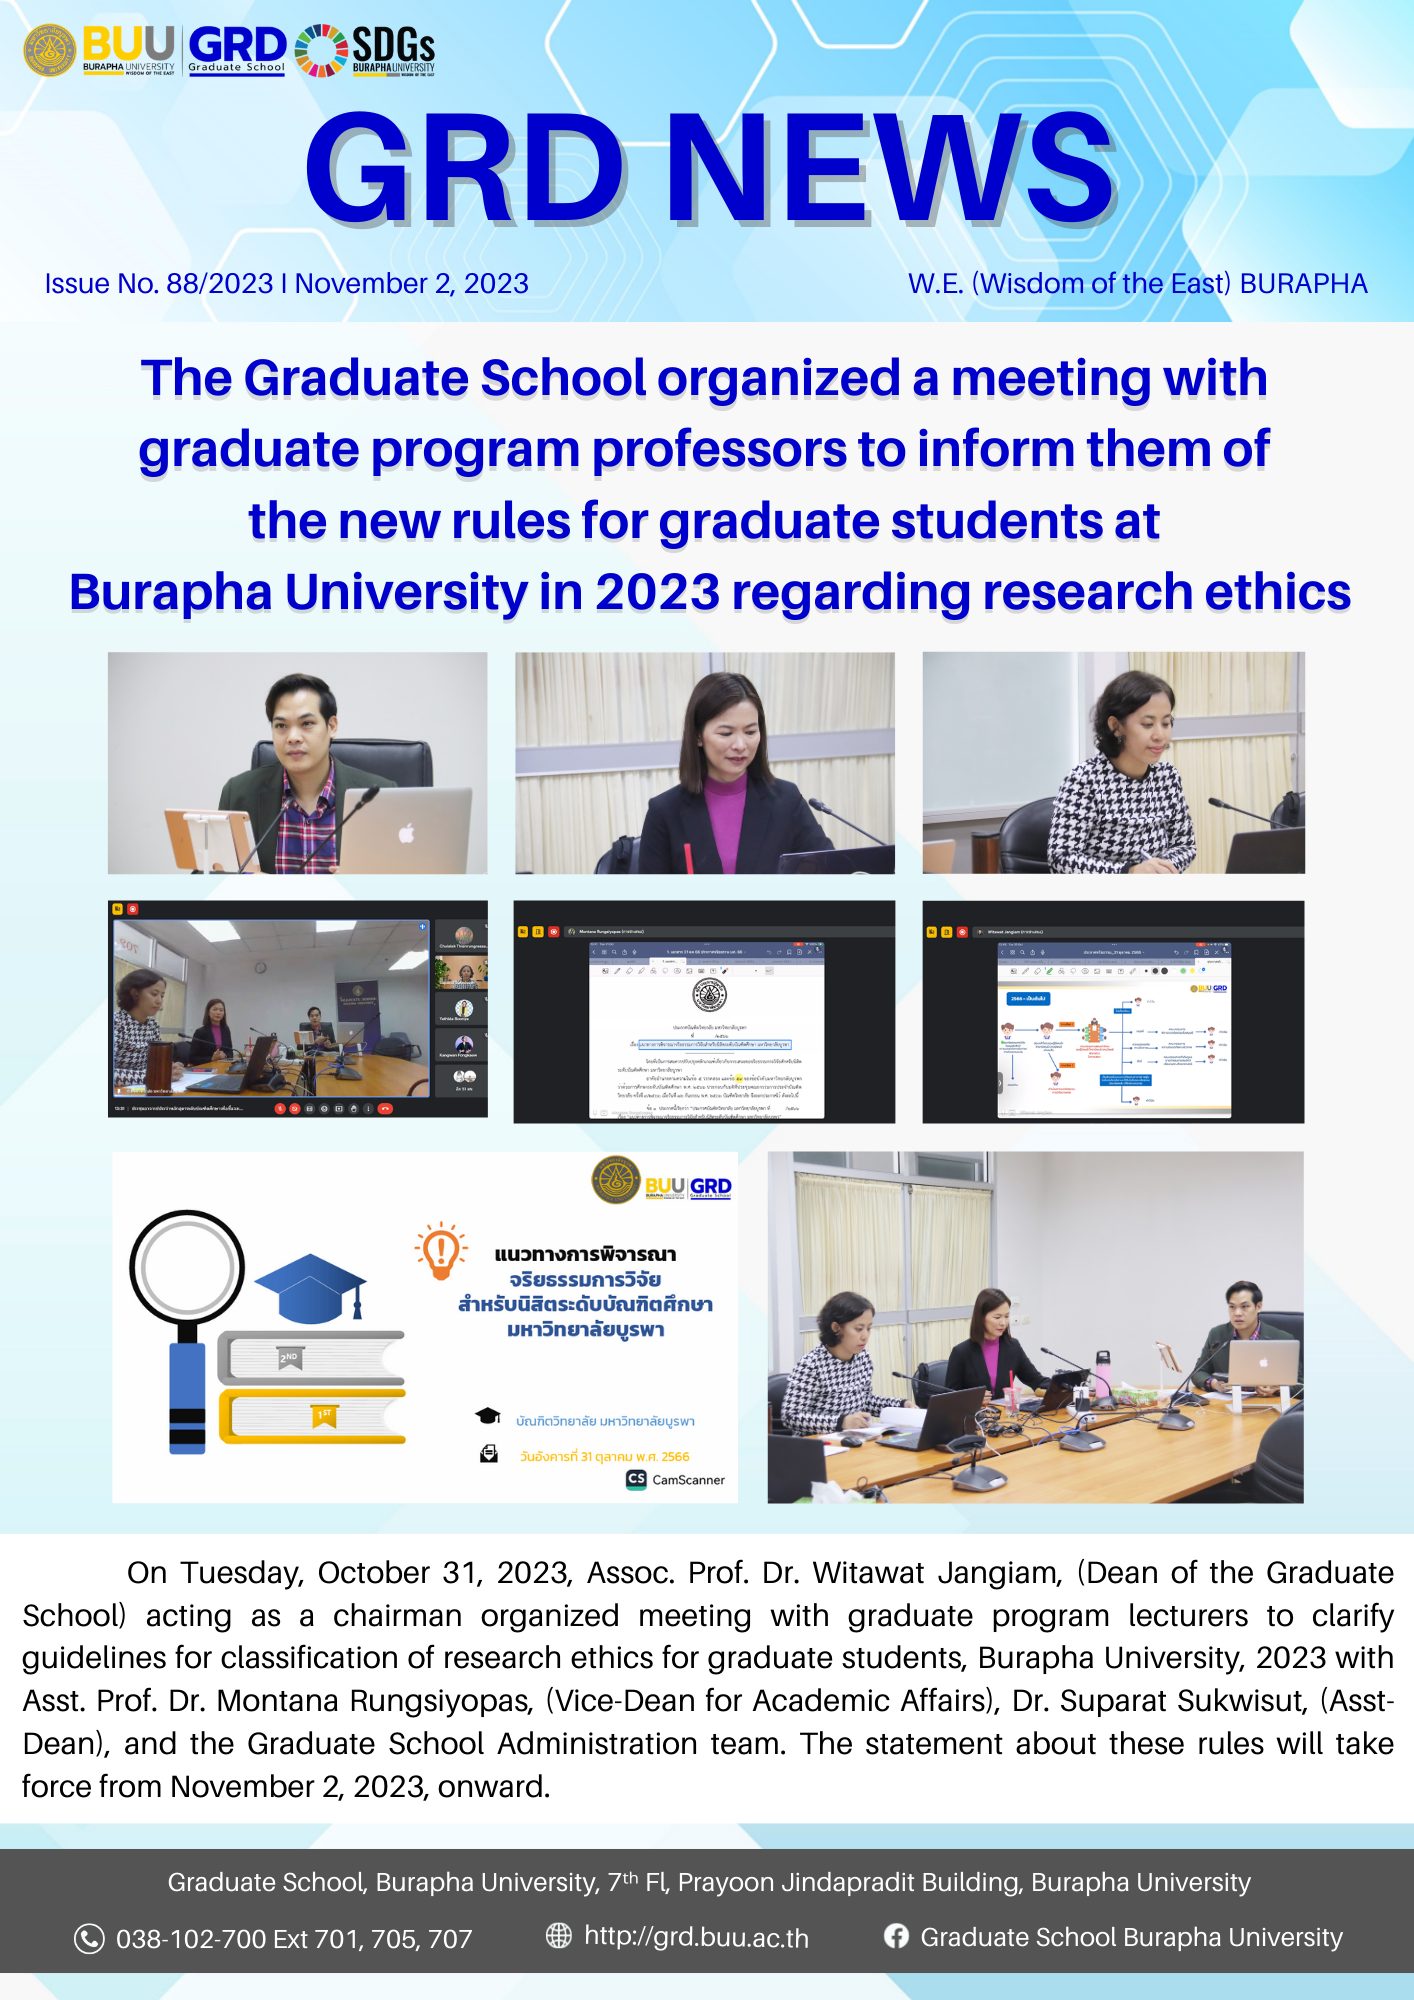 The Graduate School organized a meeting with graduate program professors to inform them of the new rules for graduate students at Burapha University in 2023 regarding research ethics